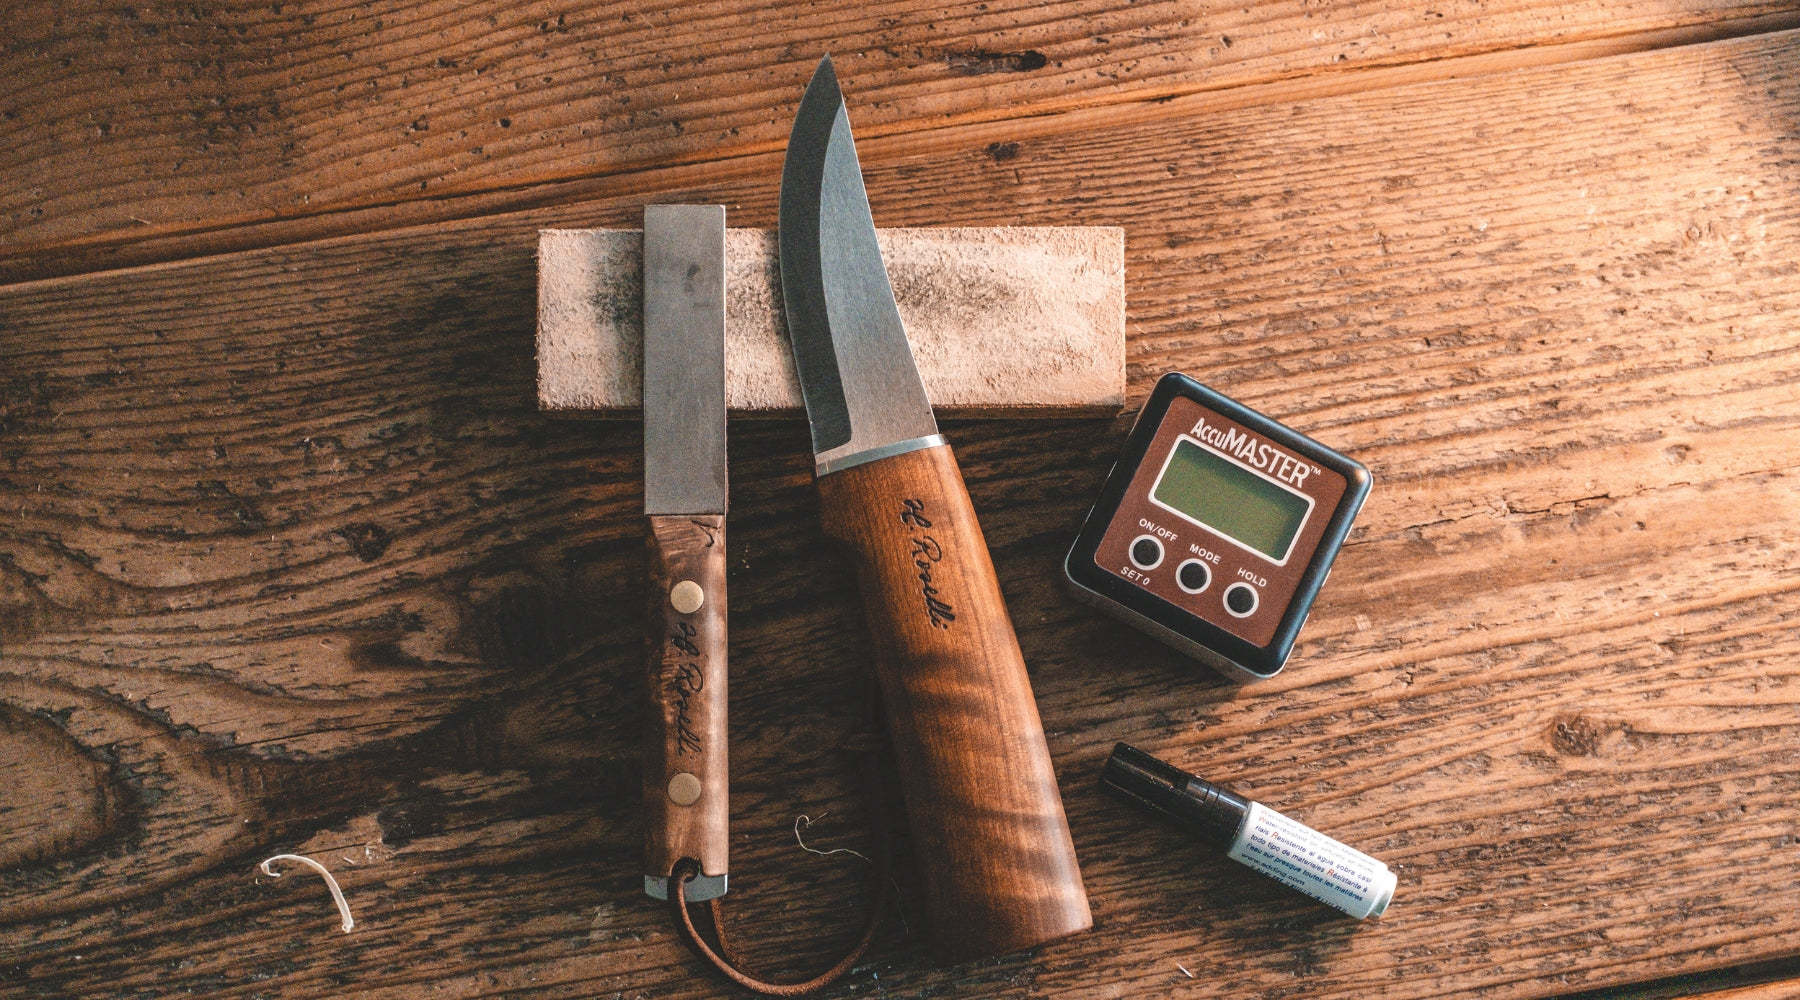 What sharpening angle should I use when sharpening my knife?